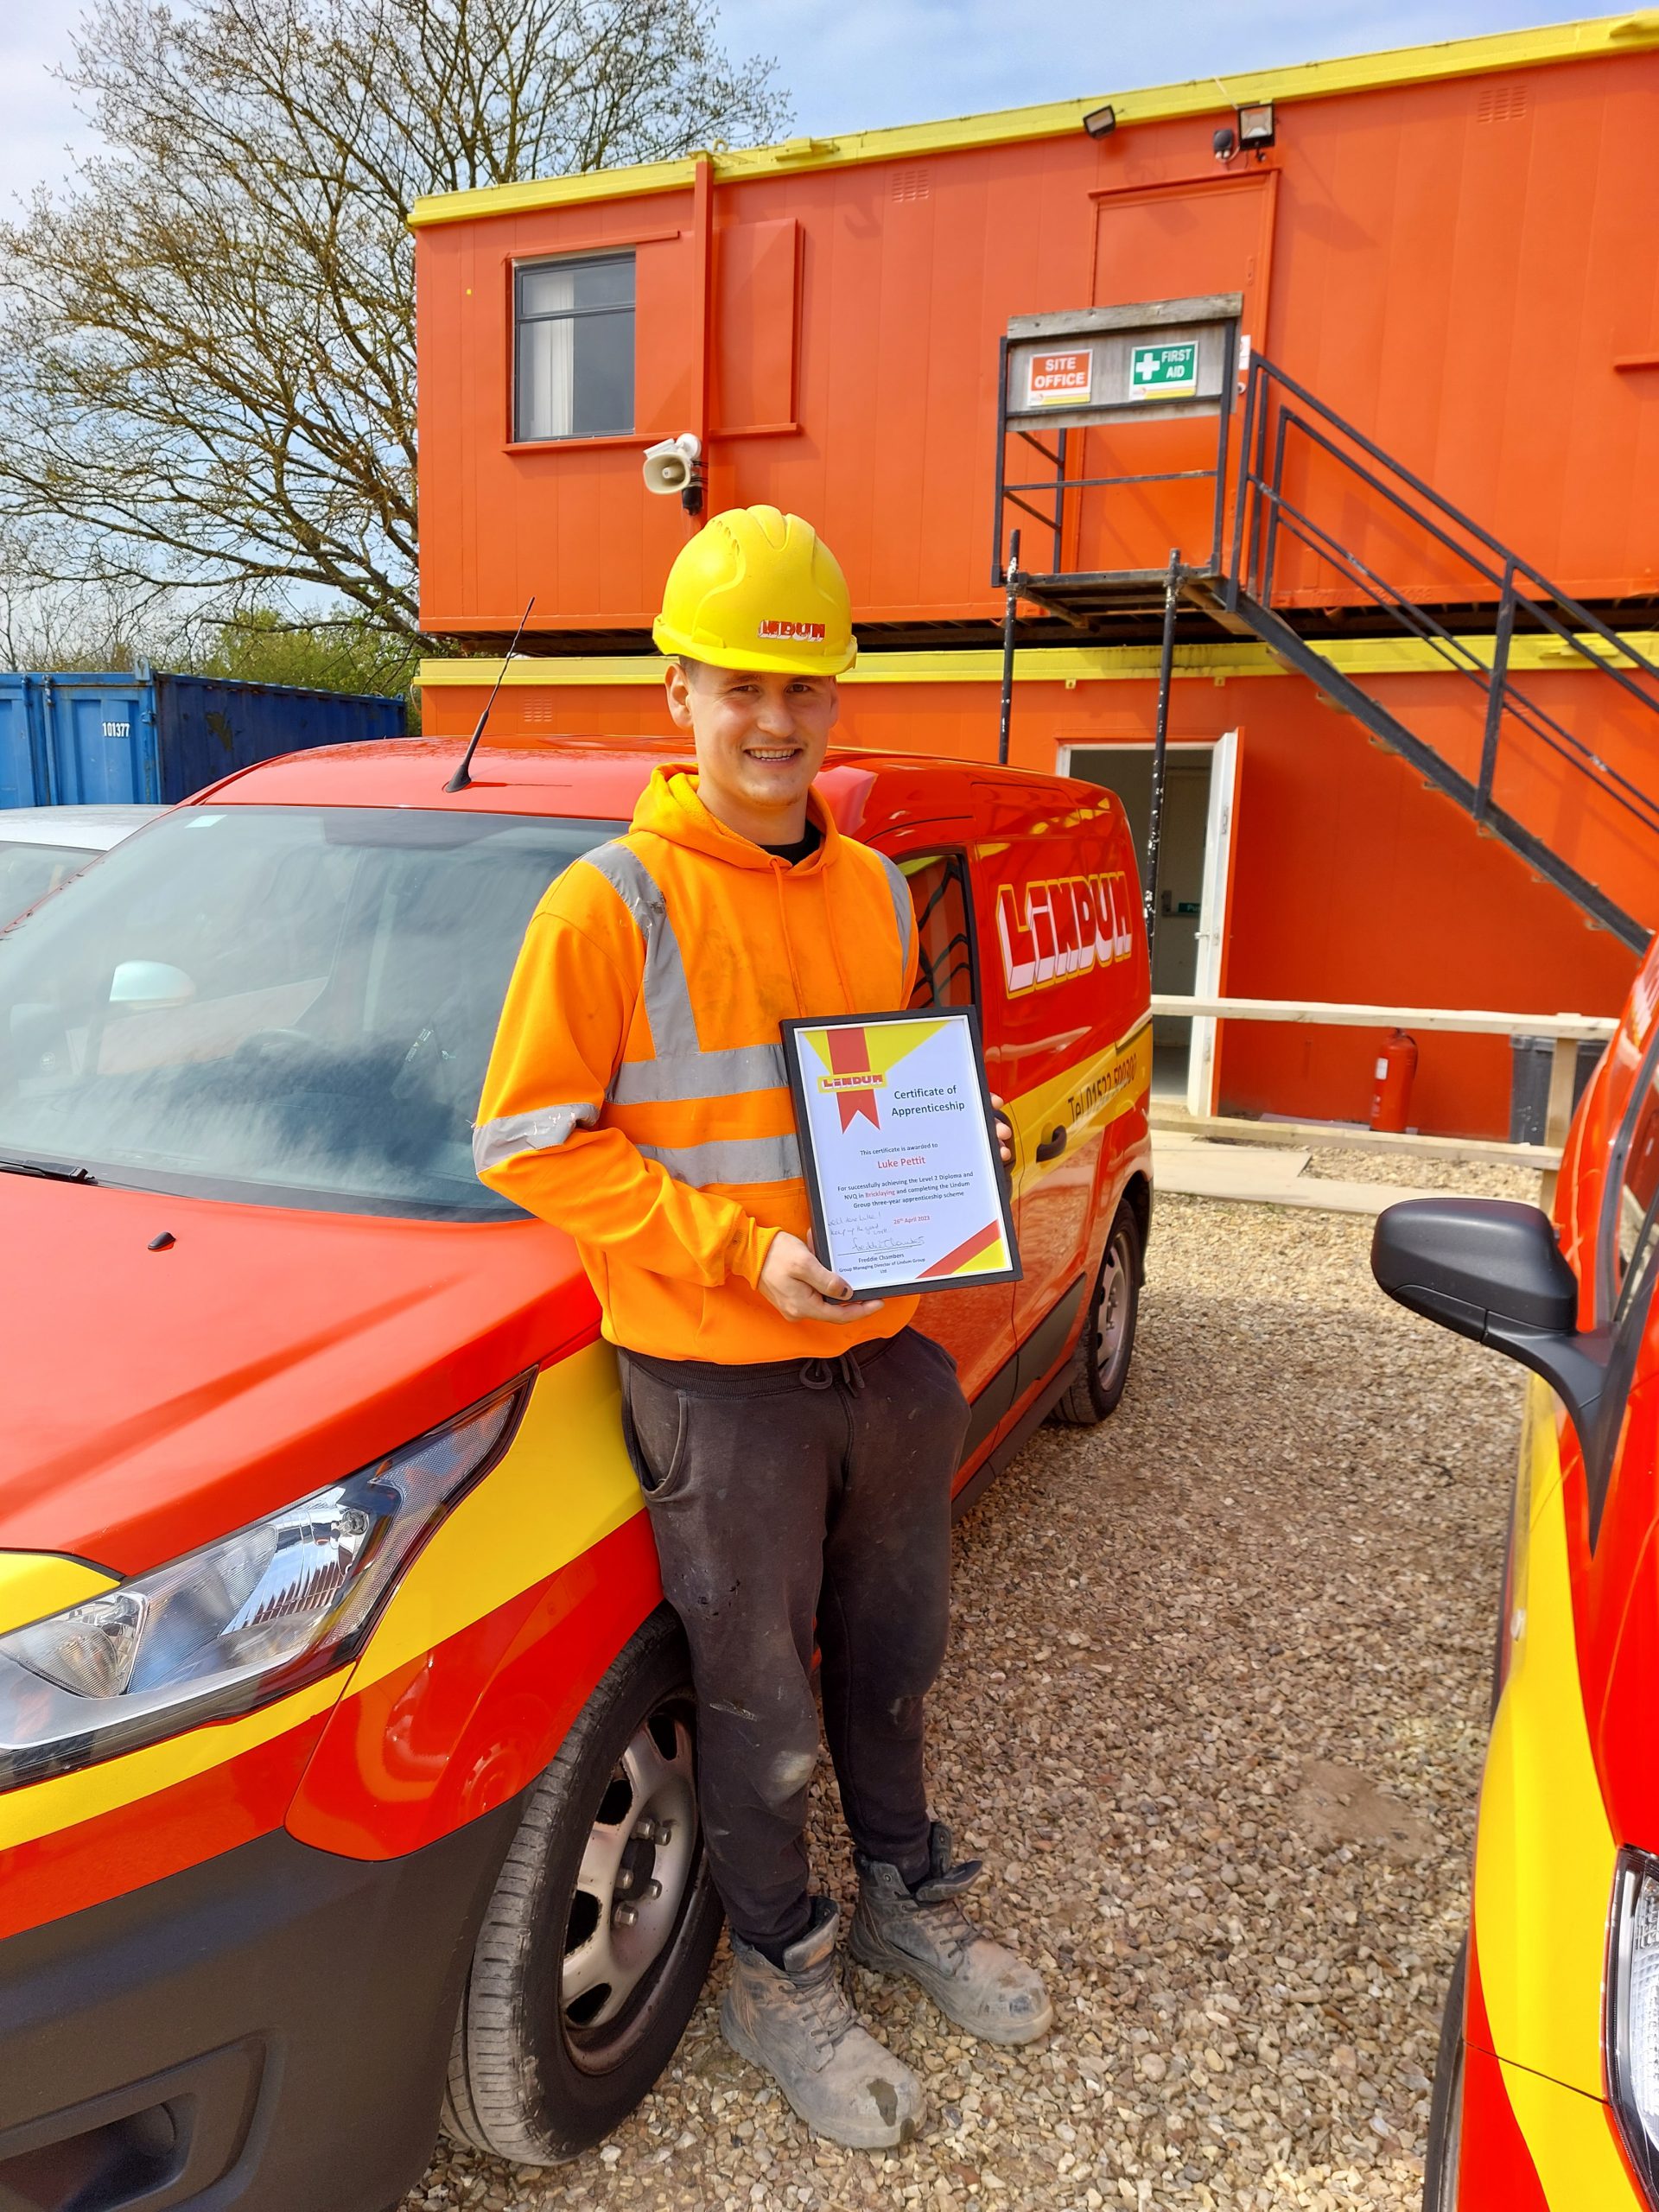 Lindum apprentice graduates to become full time bricklayer